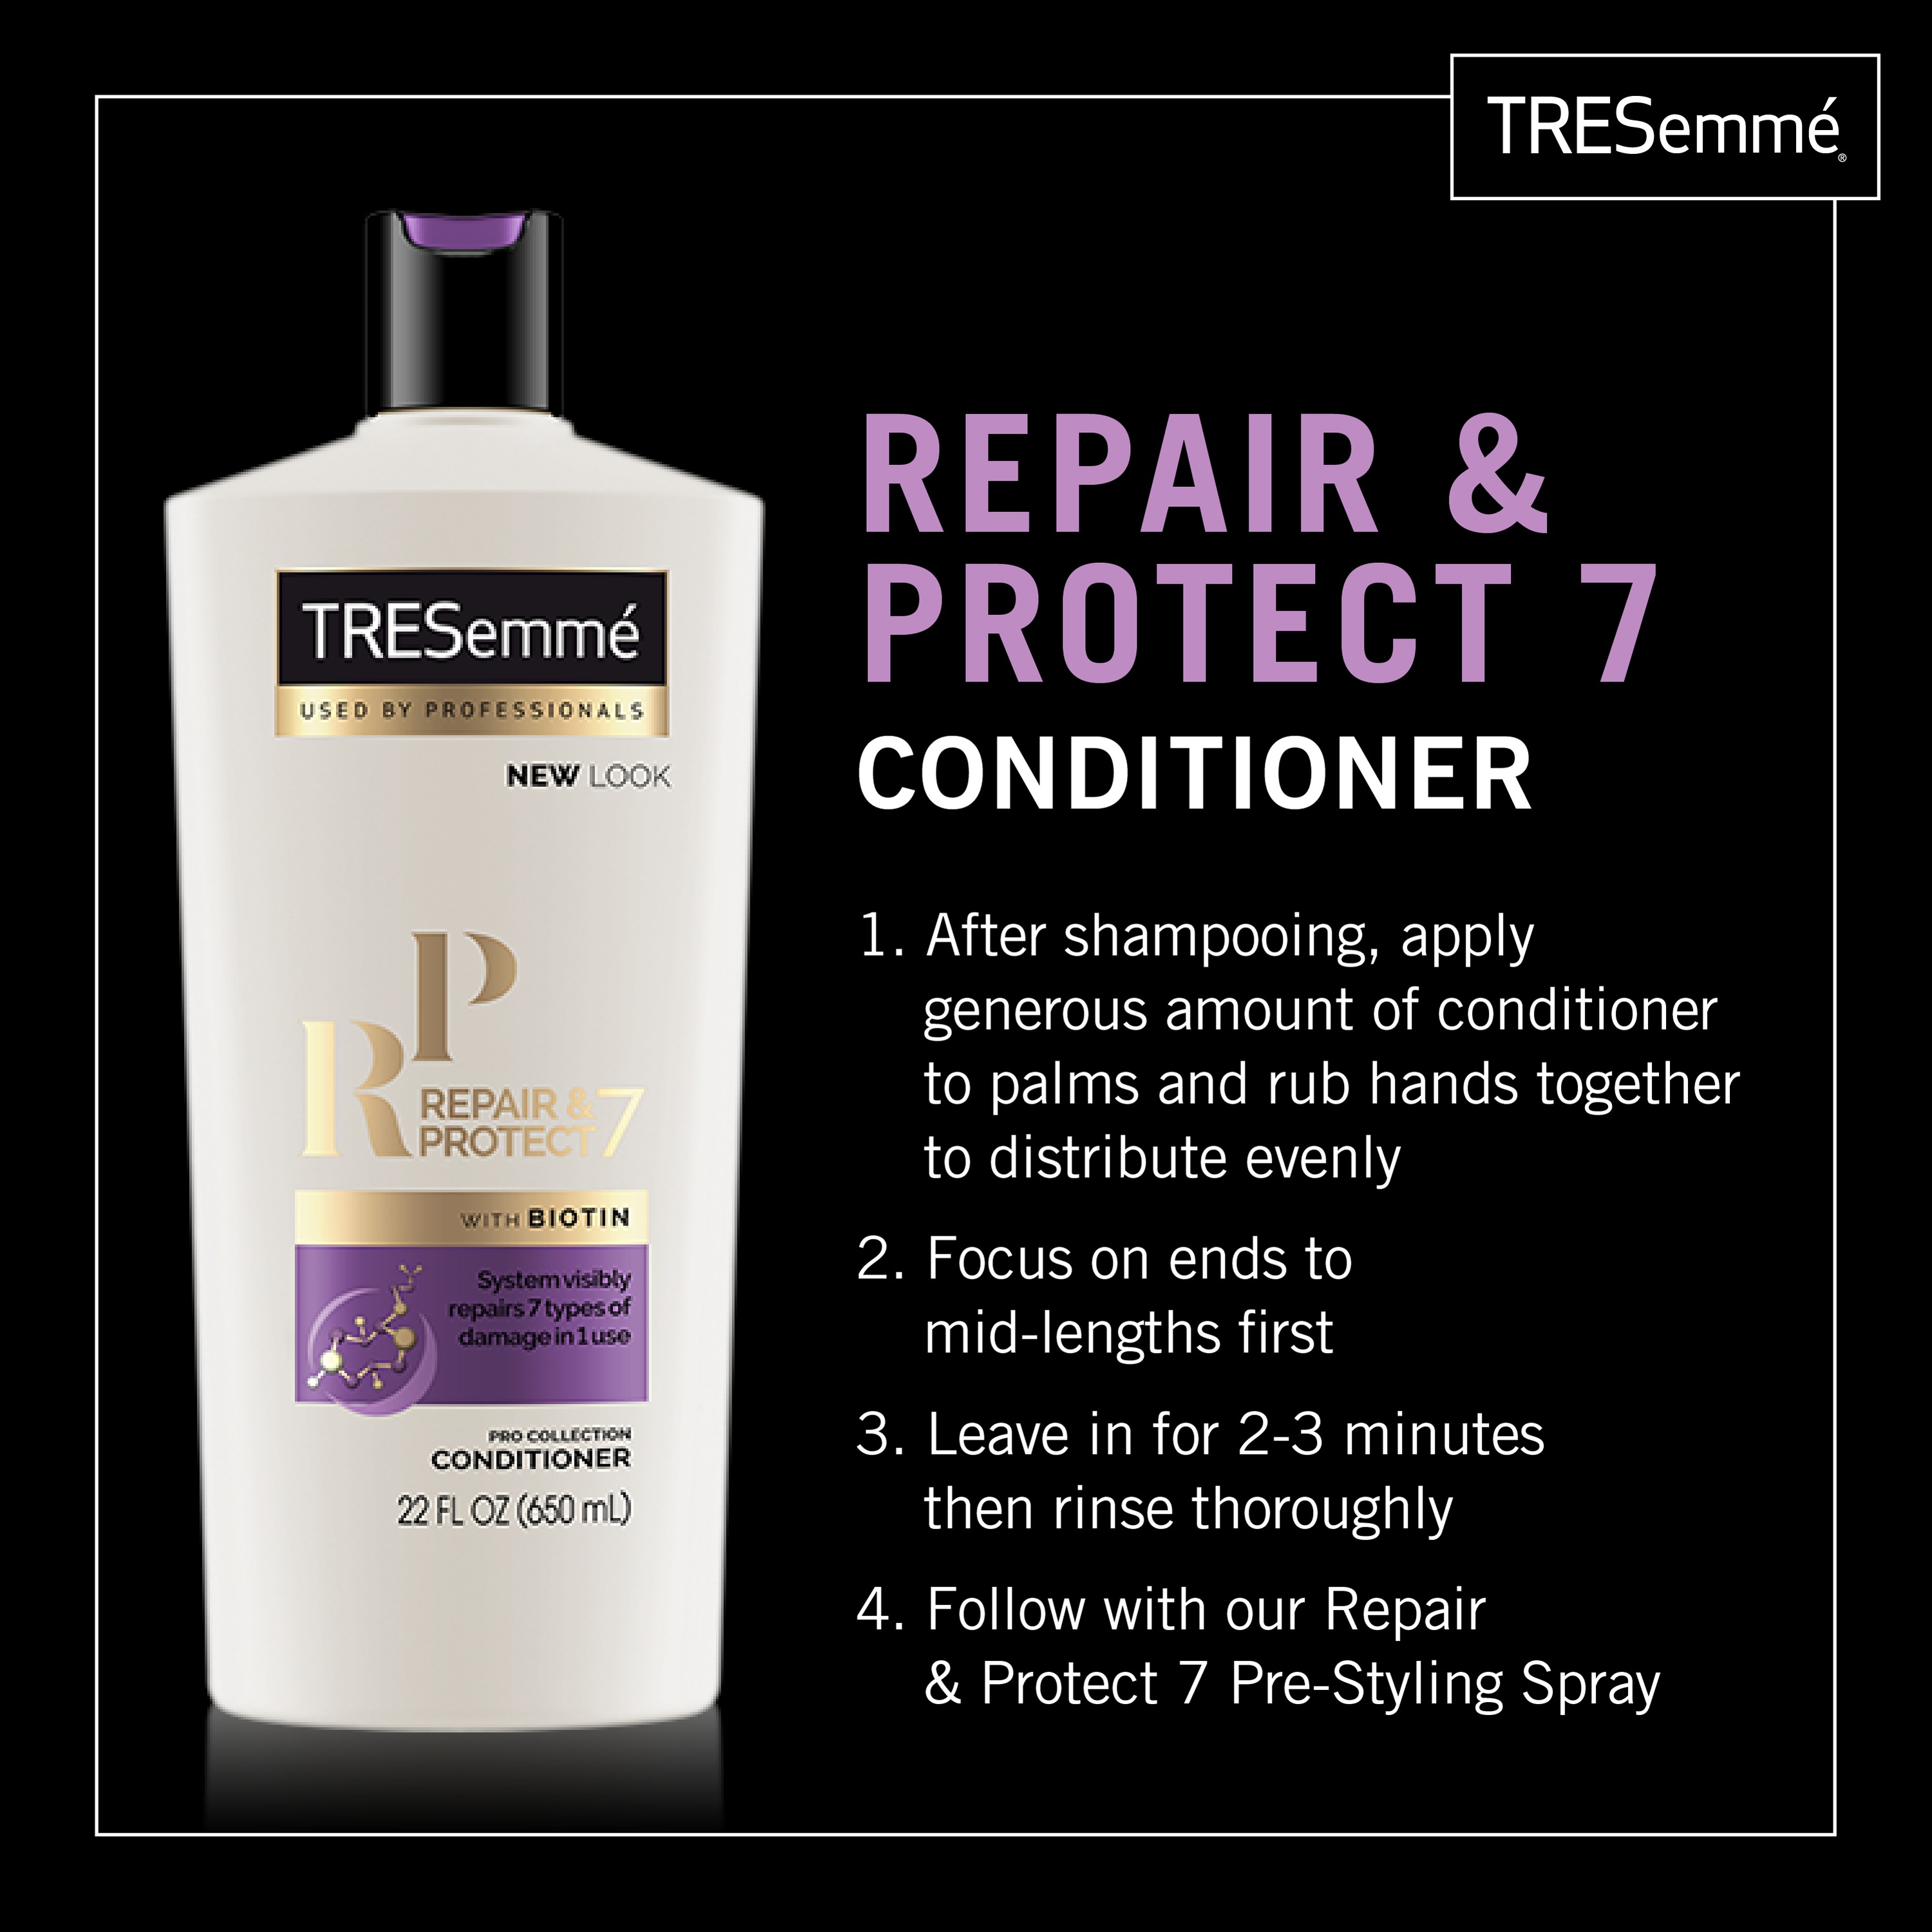 TRESemme 3-Pc Healthy & Protected Blowout Gift Set Repair and Protect with Hair Dryer (Shampoo, Conditioner) ($24.84 Value) - image 9 of 11